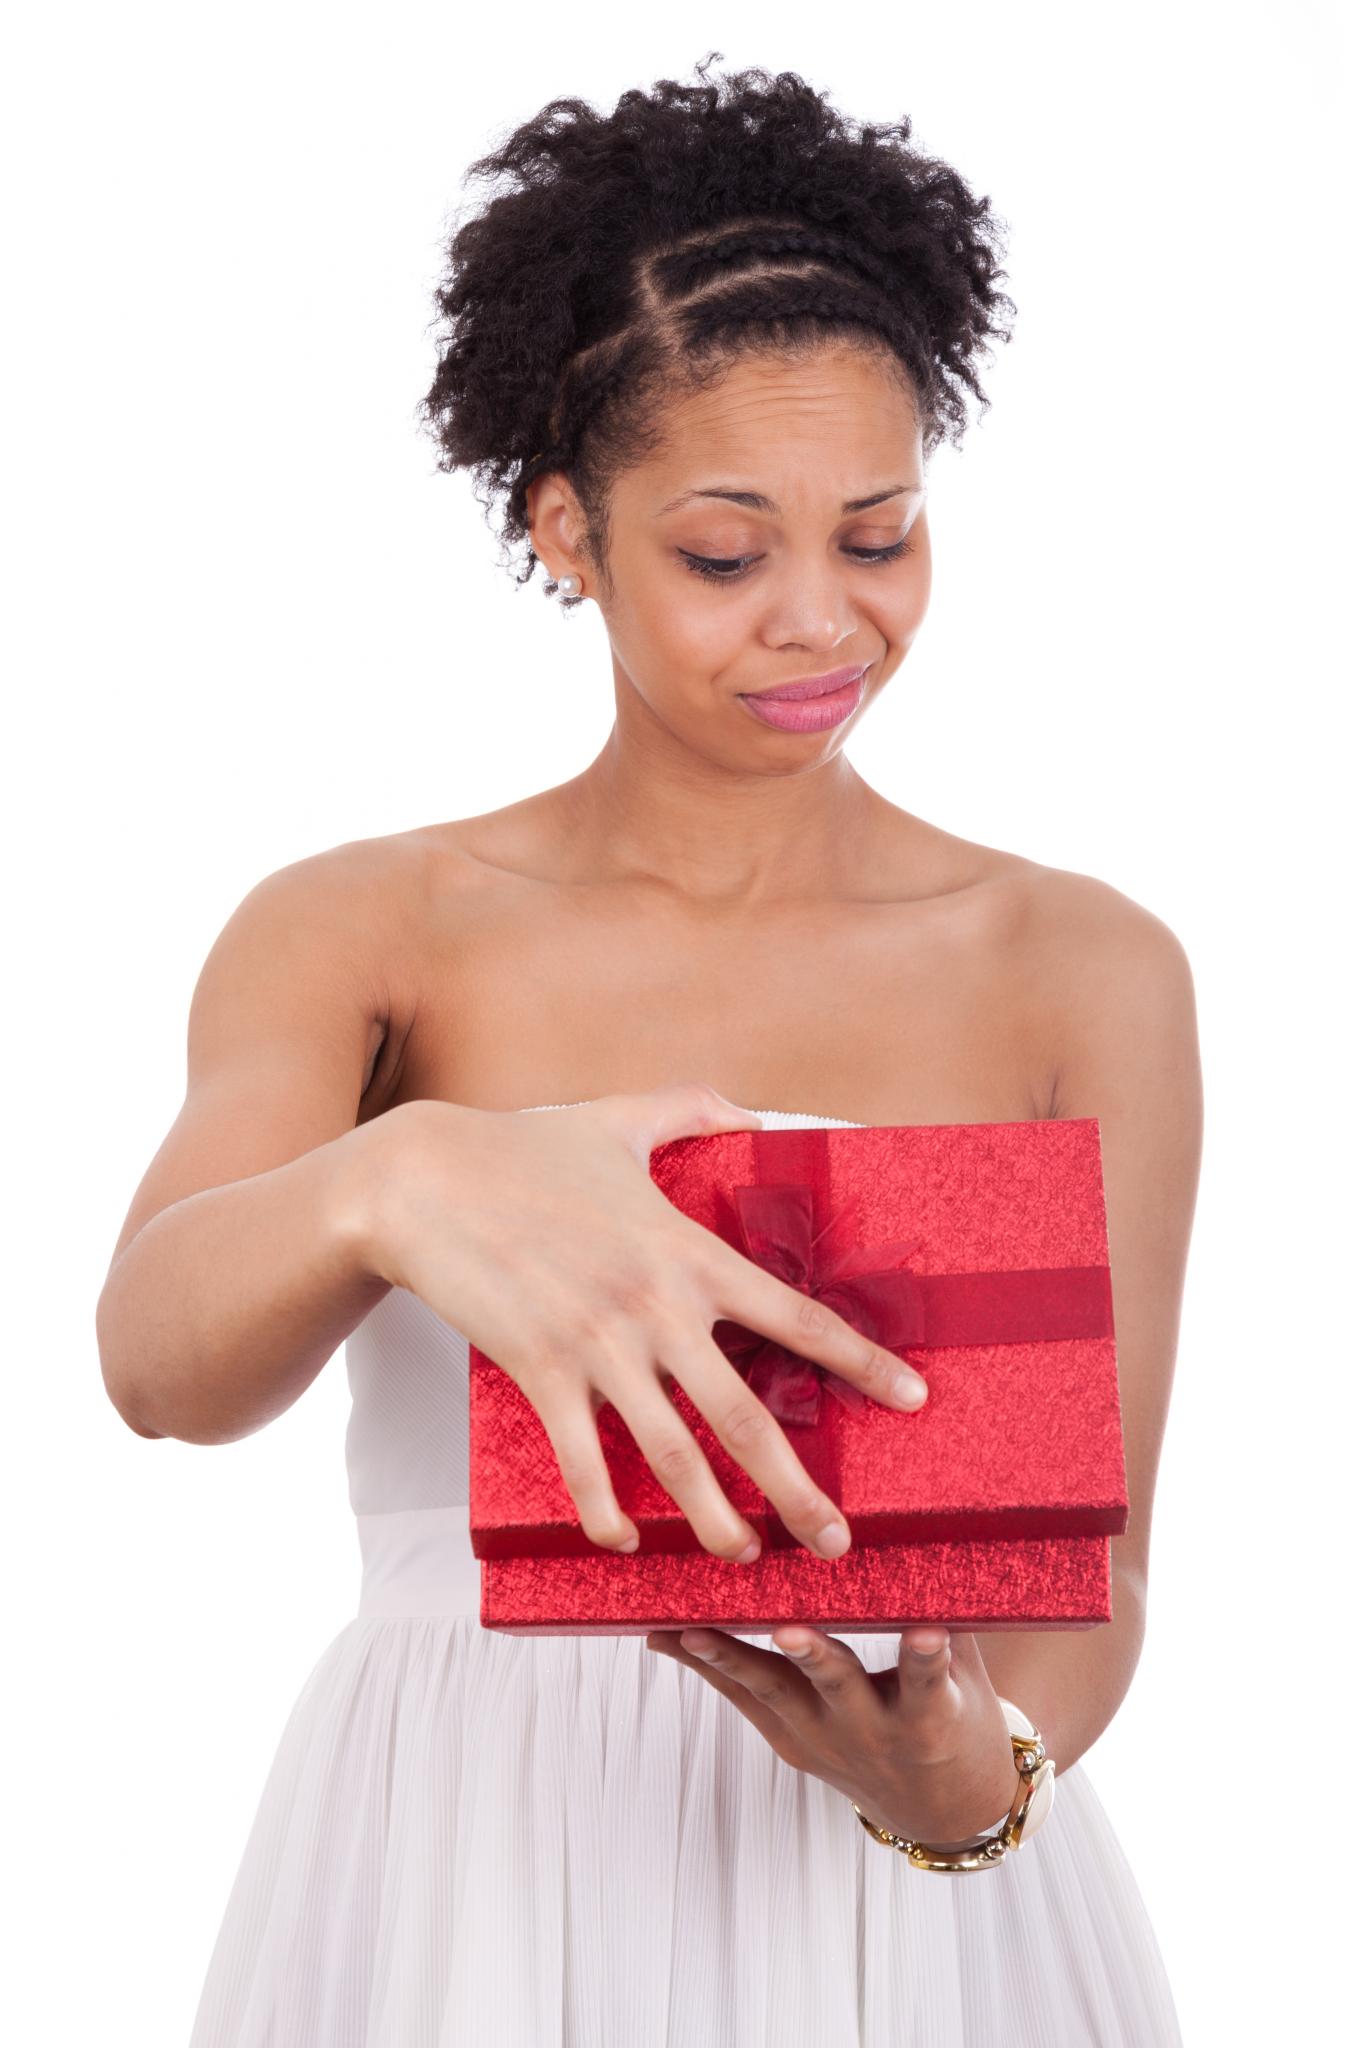 What's The Worst Gift You've Ever Received?
